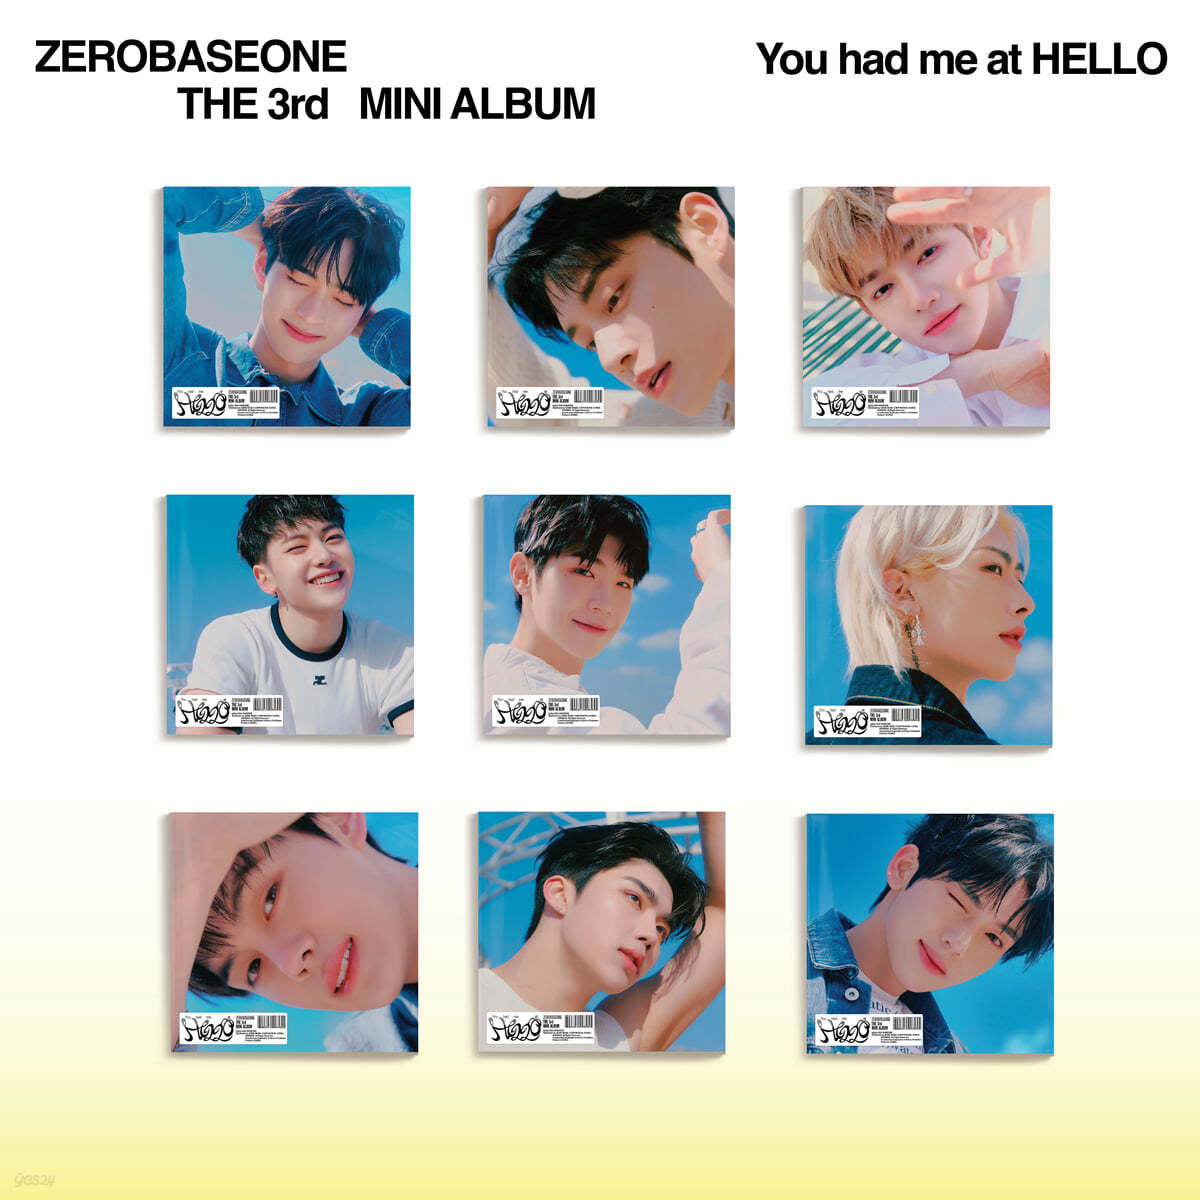 ZEROBASEONE - 미니앨범 3집 : You had me at HELLO [DIGIPACK ver.][9종 중 1종 랜덤발송]